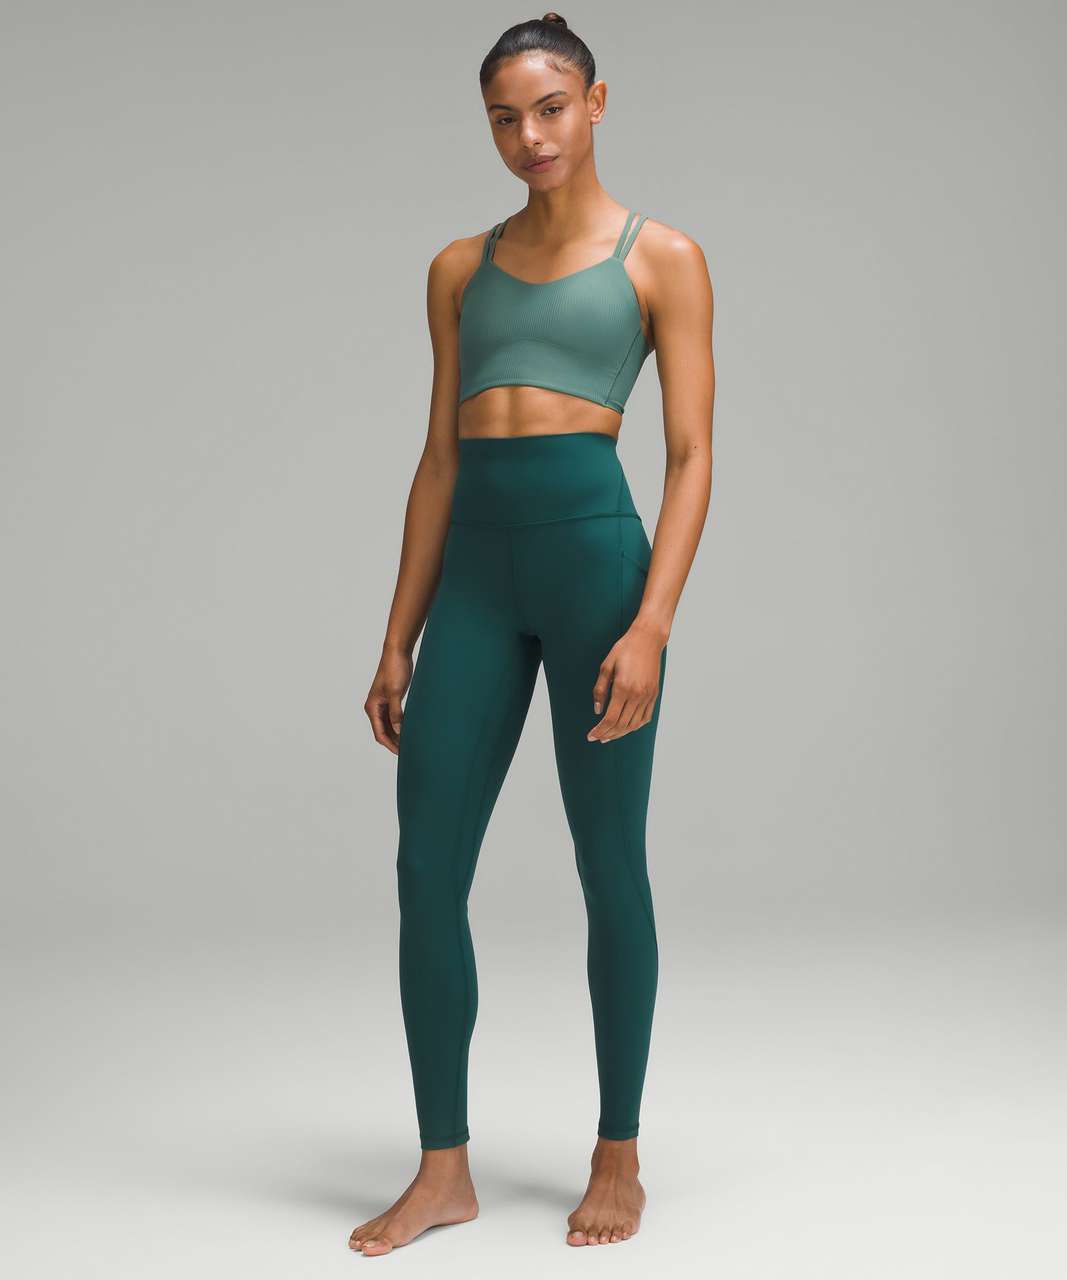 Lululemon Align High-Rise Pant with Pockets 28" - Storm Teal